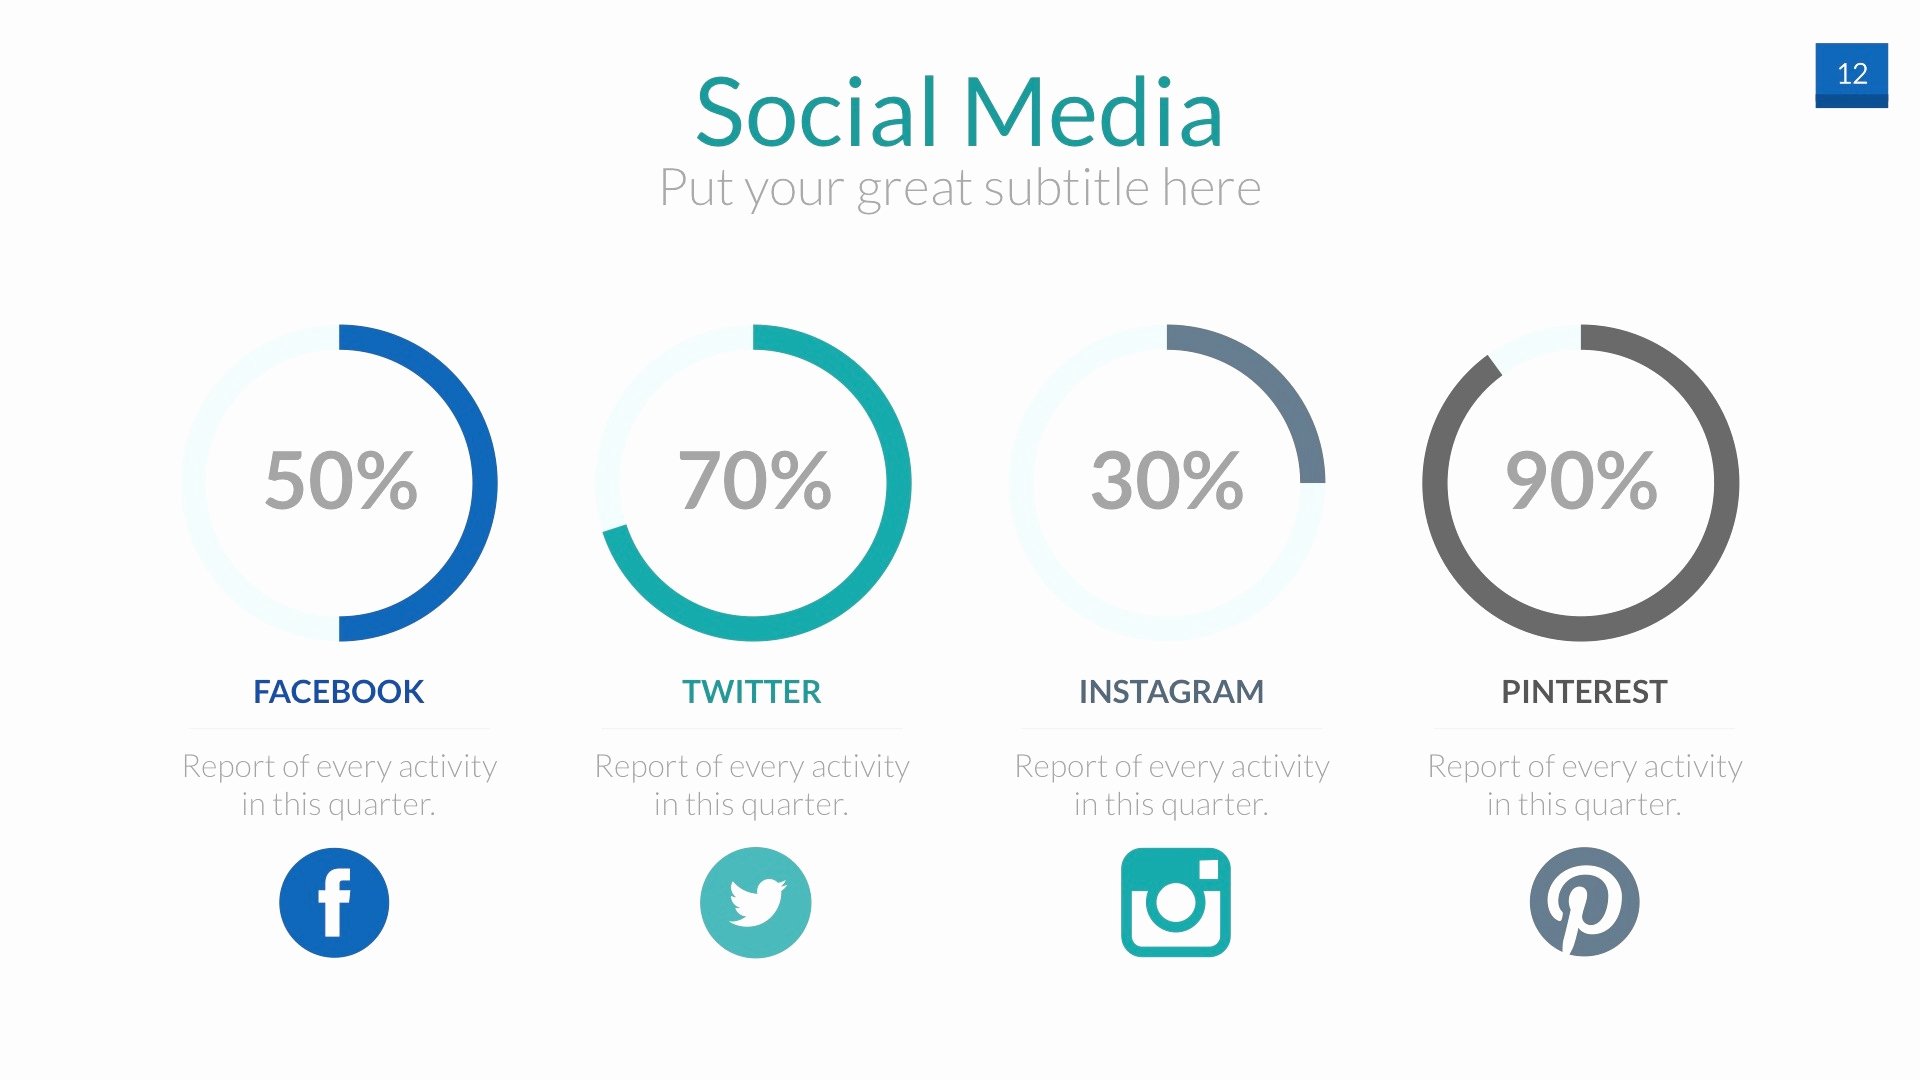 Social Media Powerpoint Presentation Template by